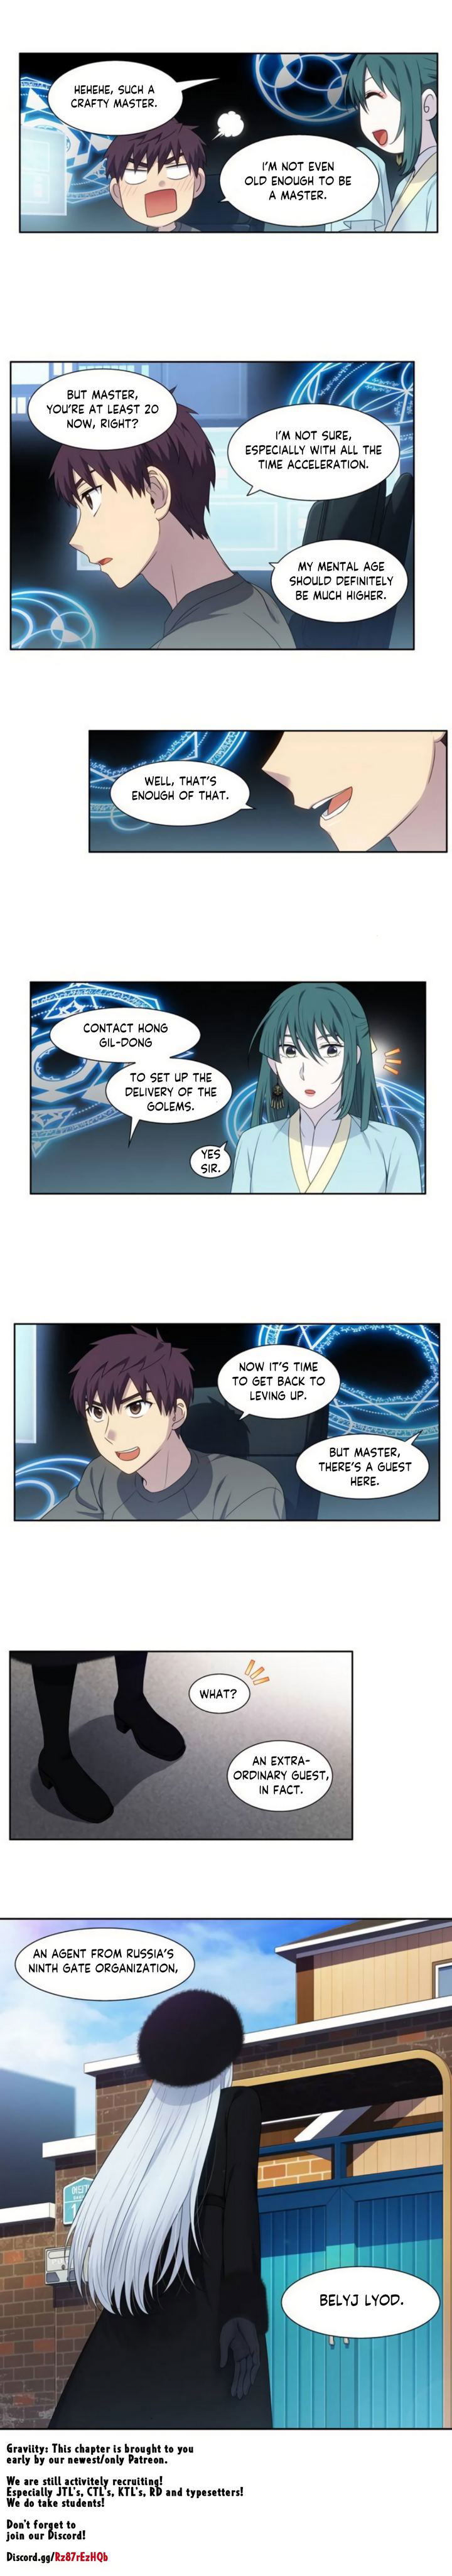 the-gamer-chap-358-8